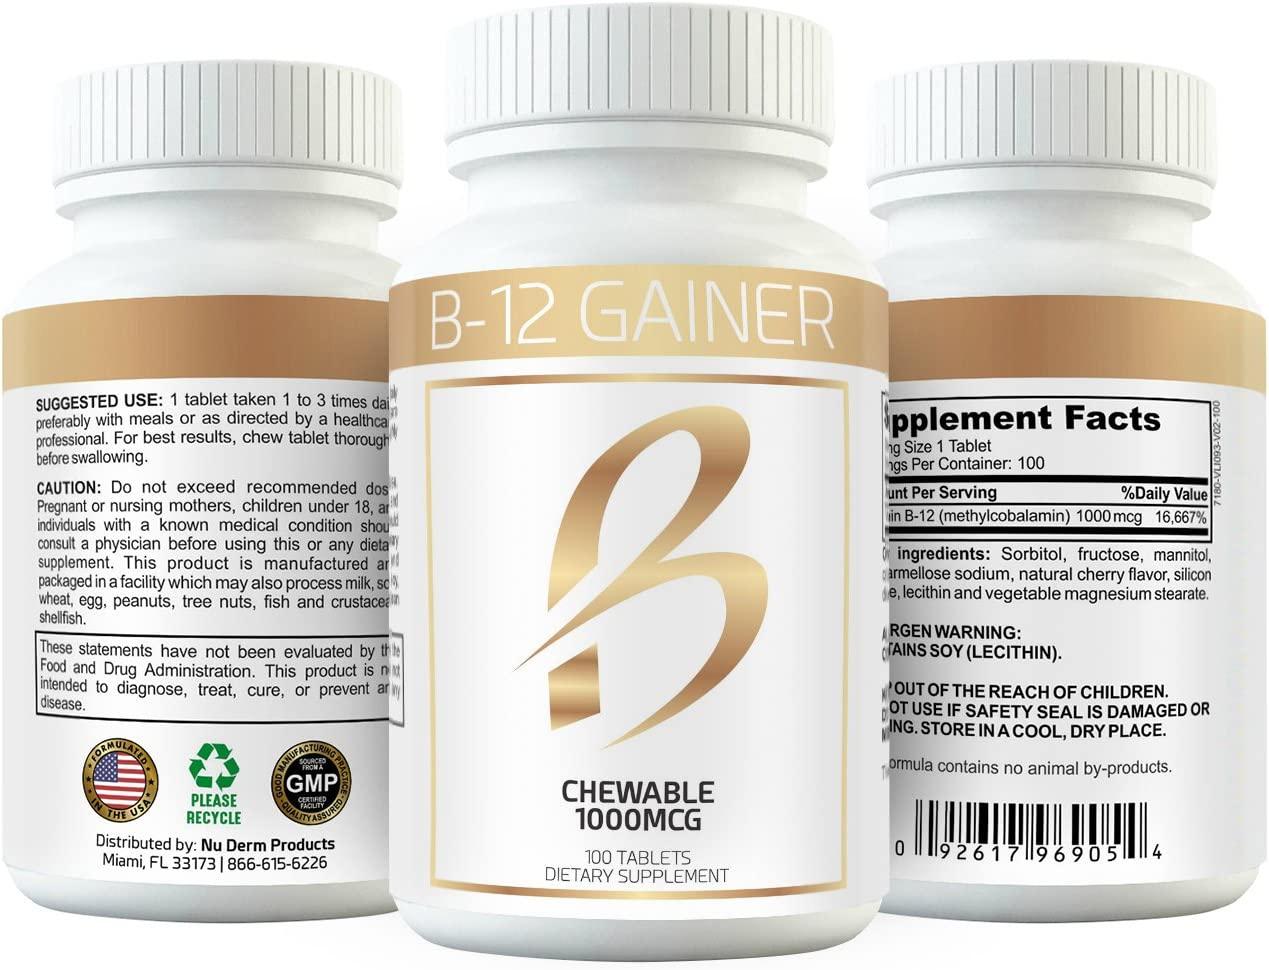 Gain Weight Fast w Weight Gainer B-12 Chewable Absorbs Faster Than Weight  Gain Pills for Fast Massive Weight Gain in Men and Women While Opening Your  Appetite More Than Protein